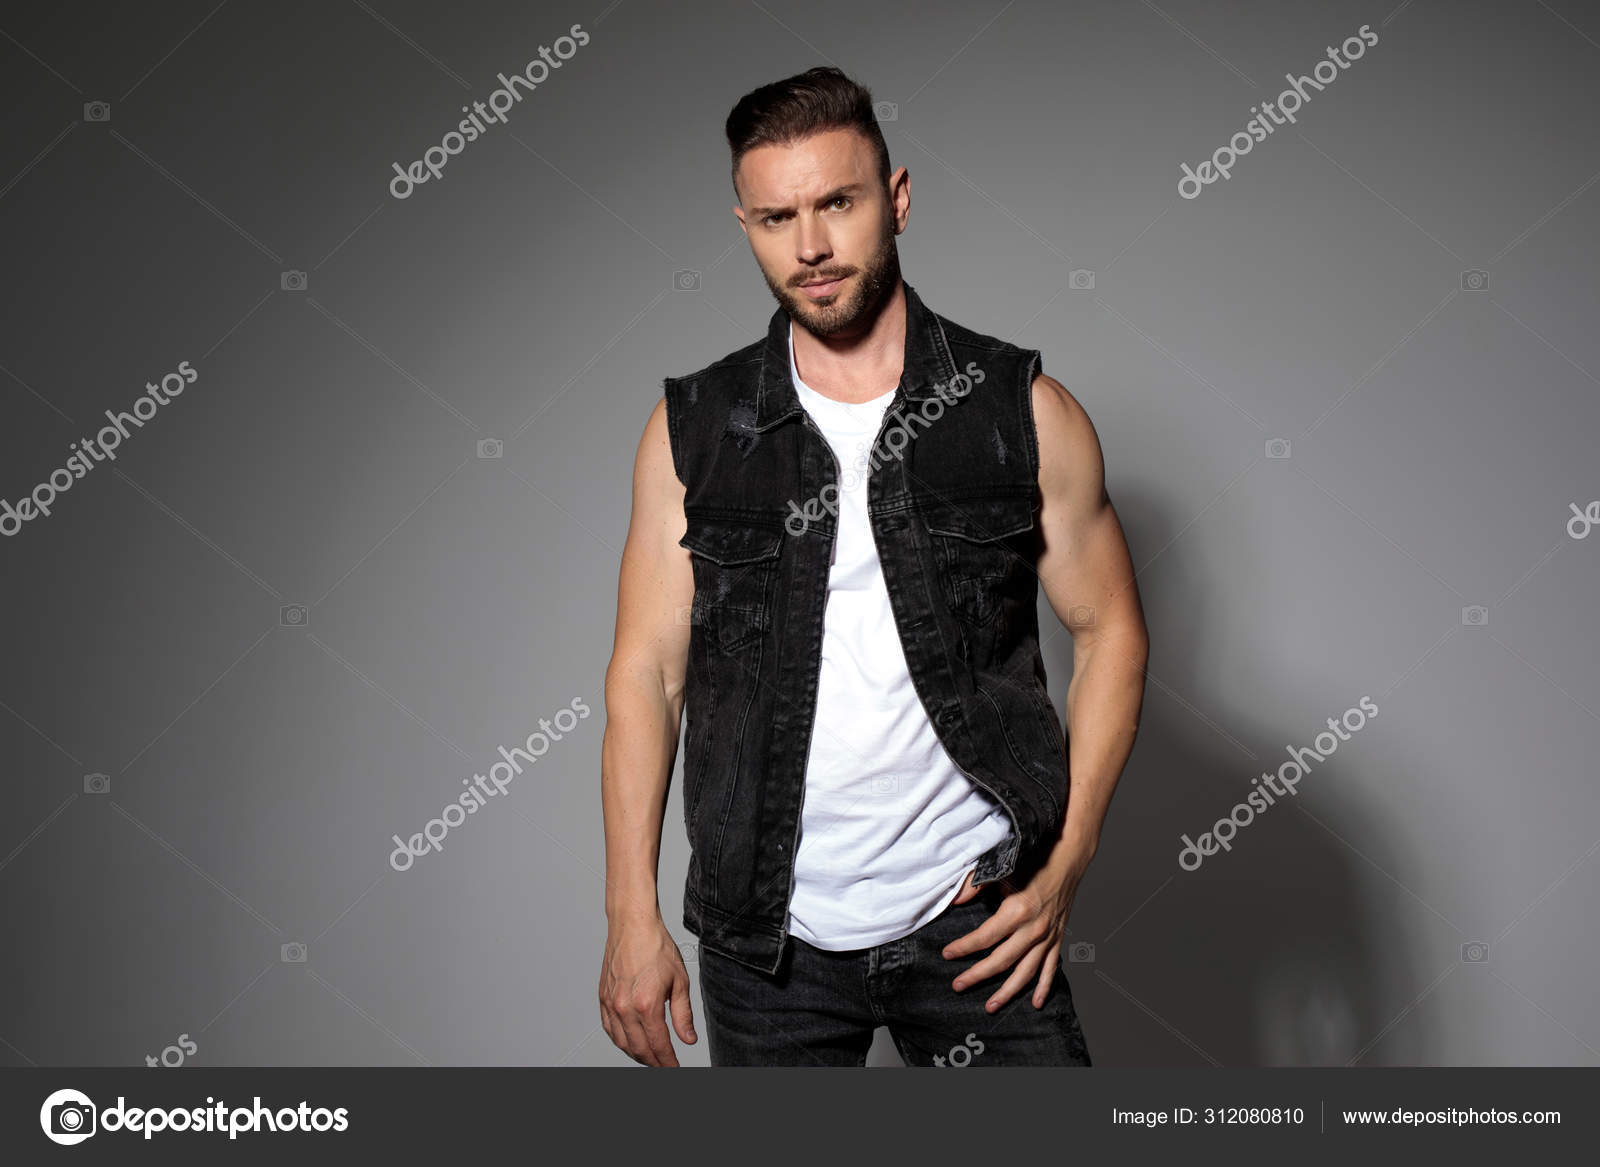 Snooze Kolibrie Kast Determined casual man posing and wearing a black jeans vest Stock Photo by  ©feedough 312080810